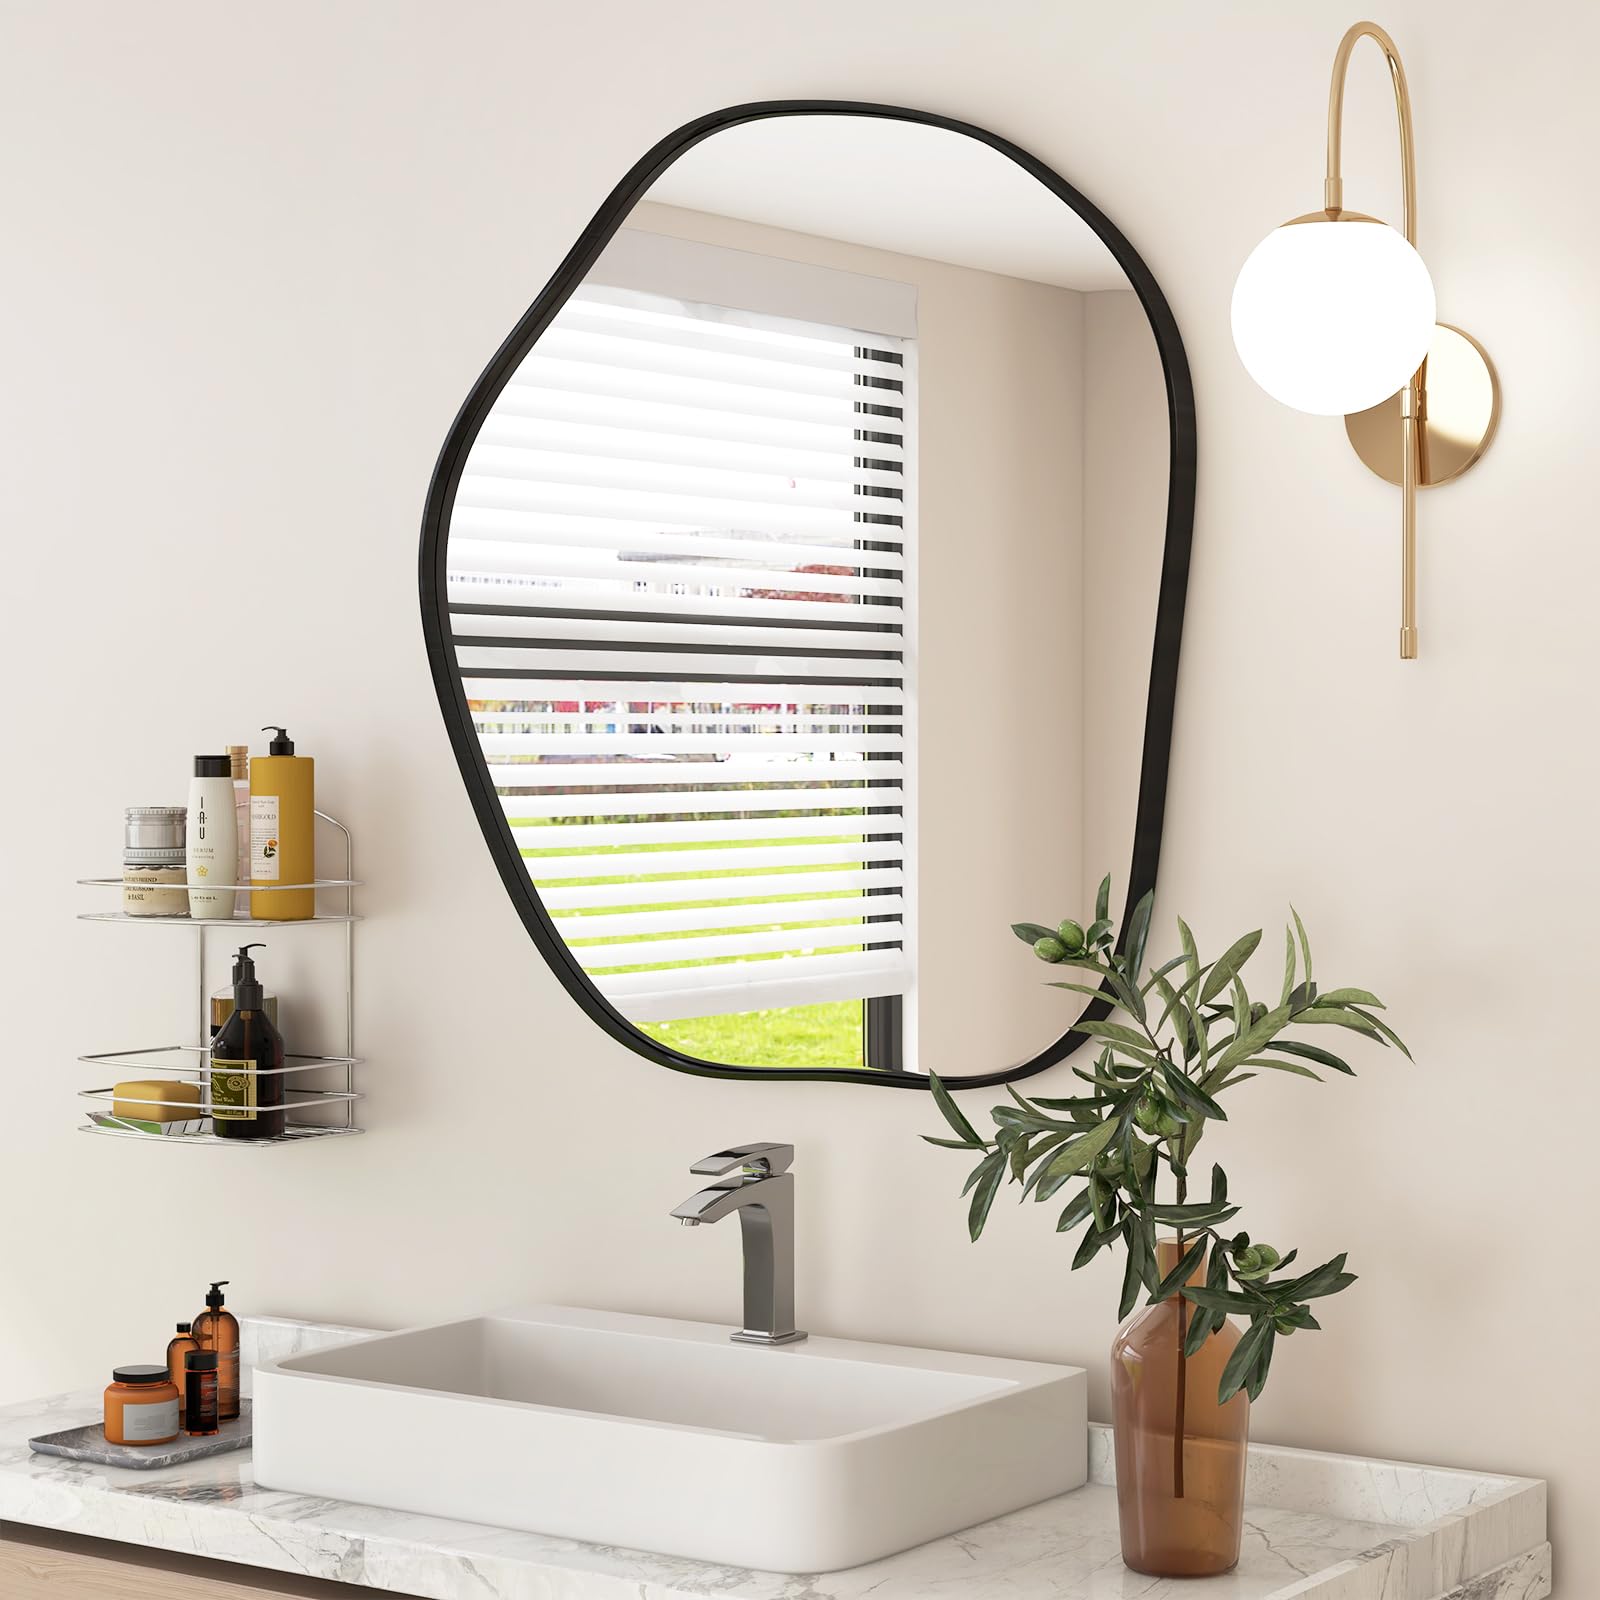 CHARMAID Irregular Wall Mirror, Asymmetrical Mirror Wall Mounted with Metal Frame and Wood Back Broad